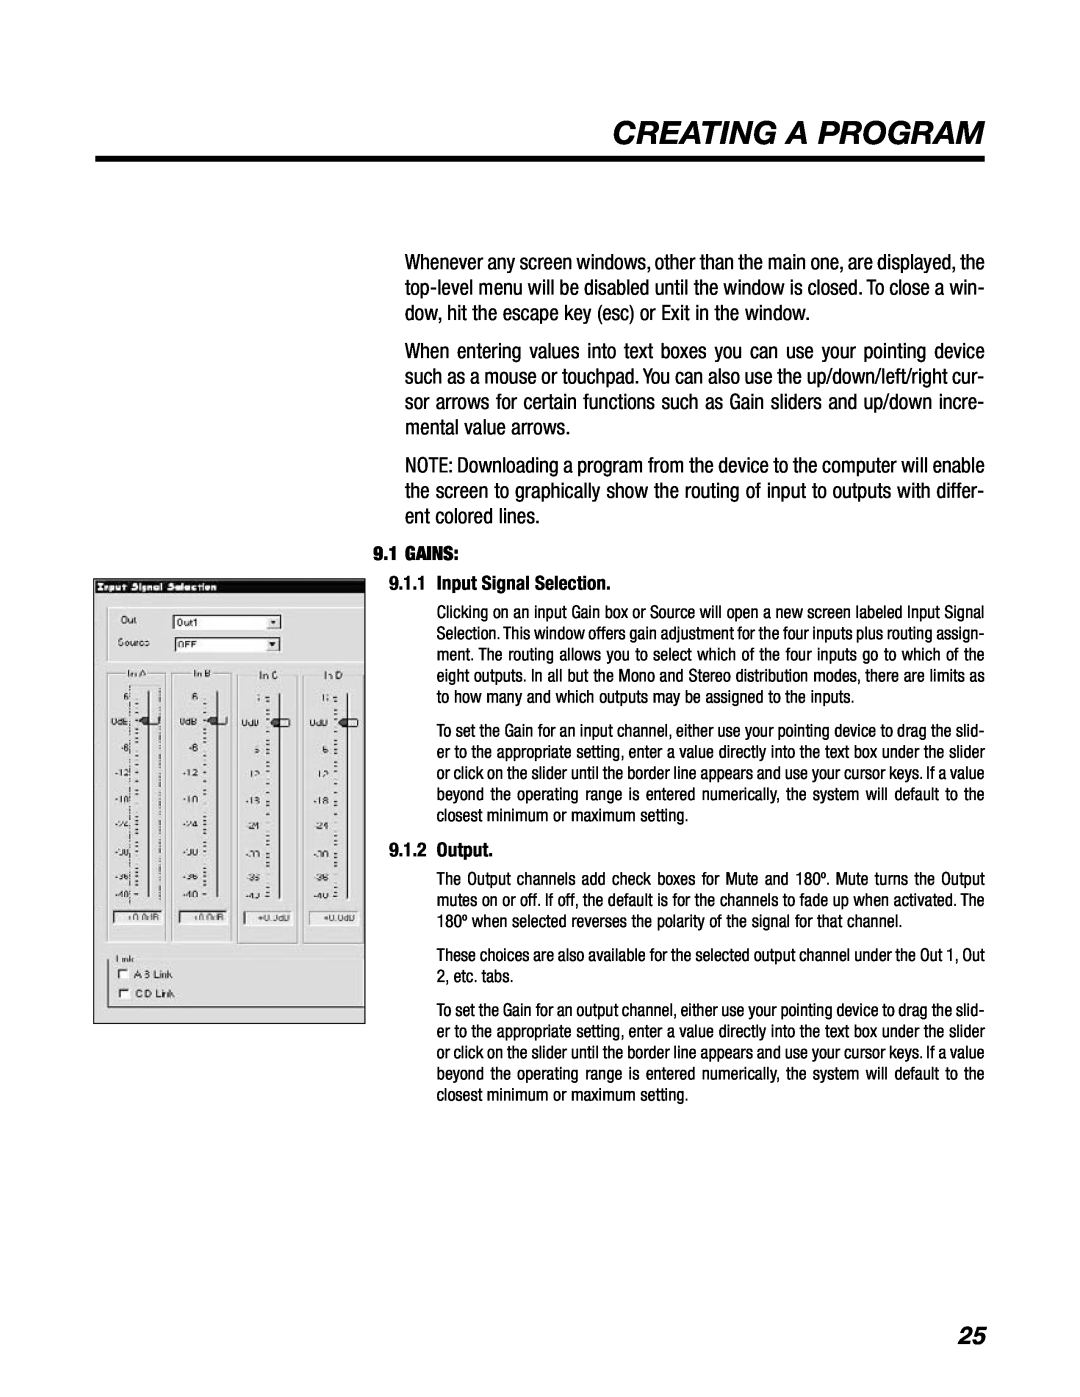 BBE DS48 manual Creating A Program, 9.1GAINS 9.1.1Input Signal Selection, 9.1.2Output 